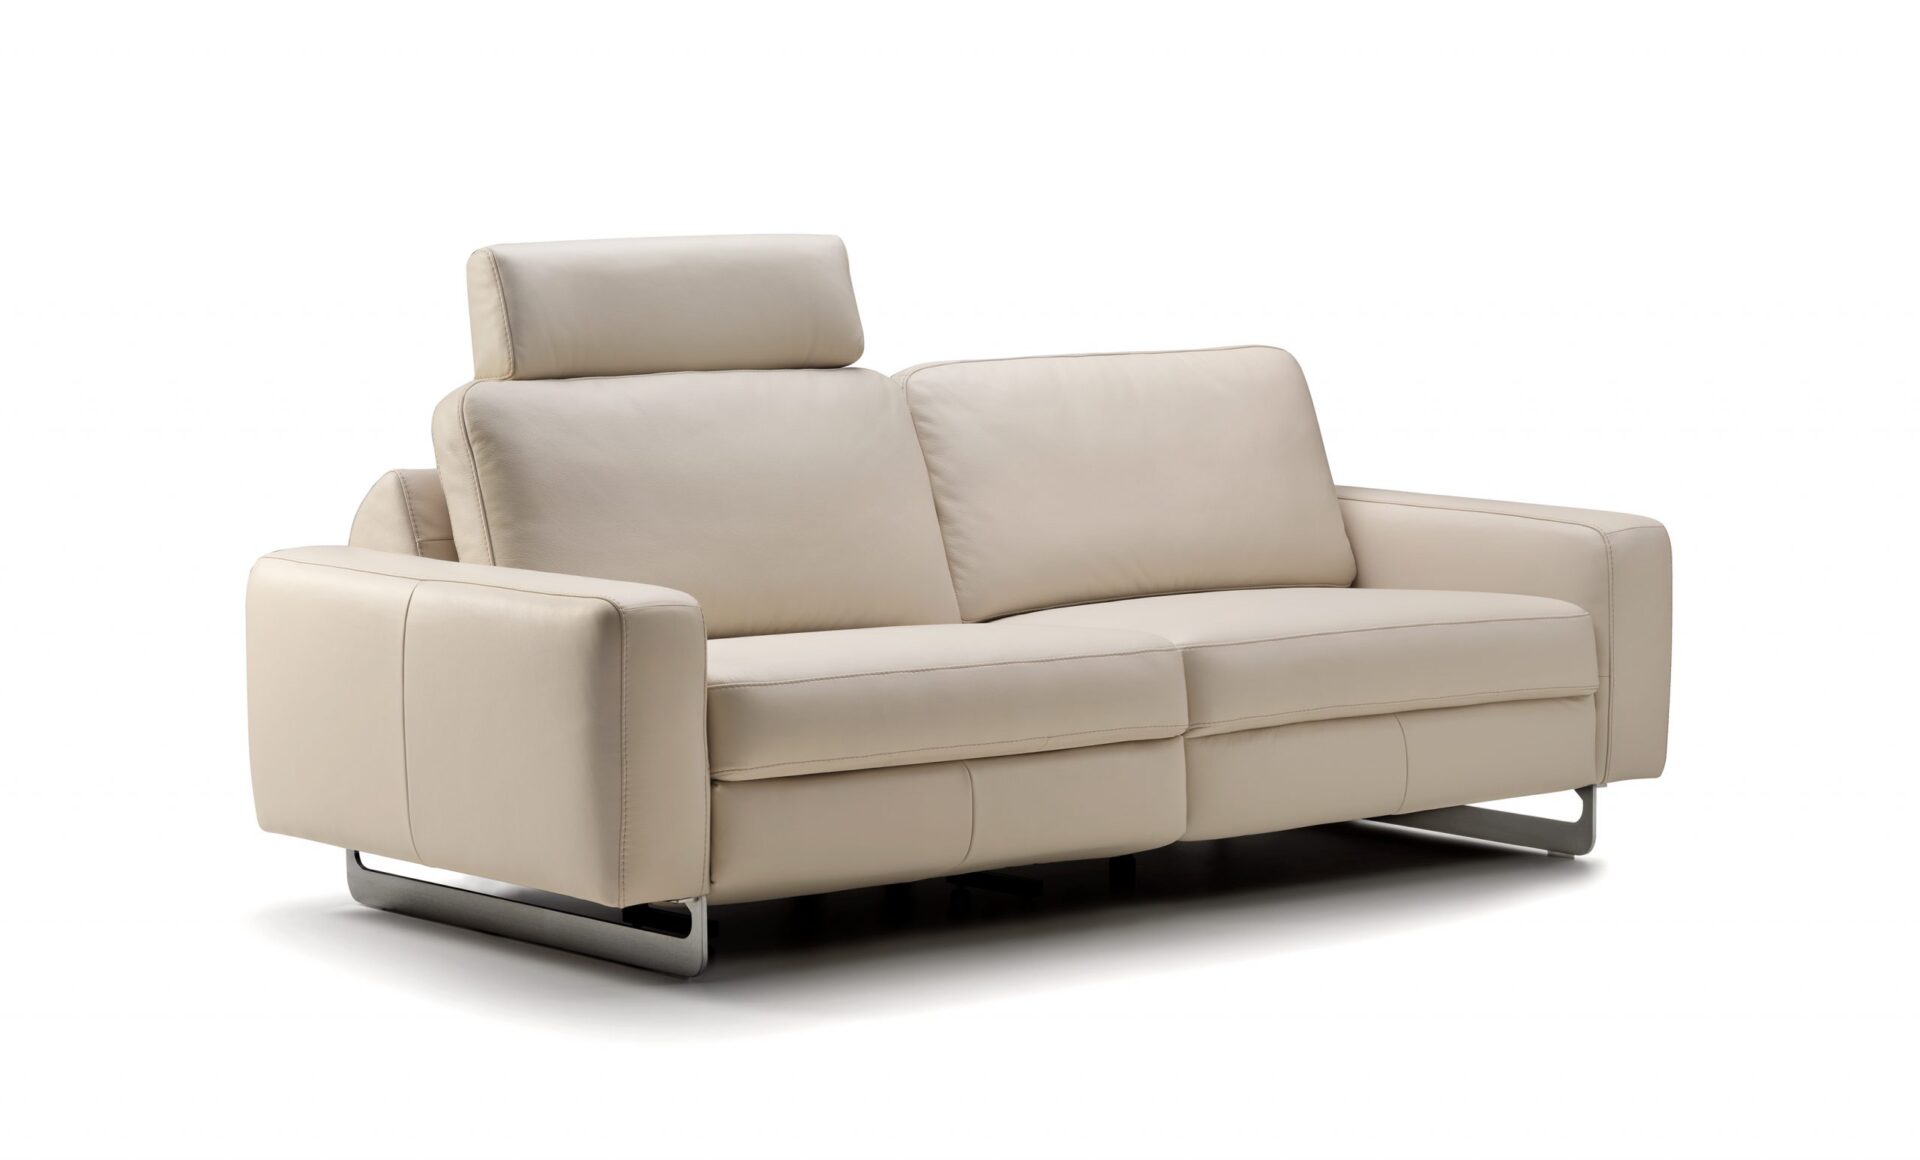 Rom1961 - Tamour 3 seater longchair MaxRelax side view